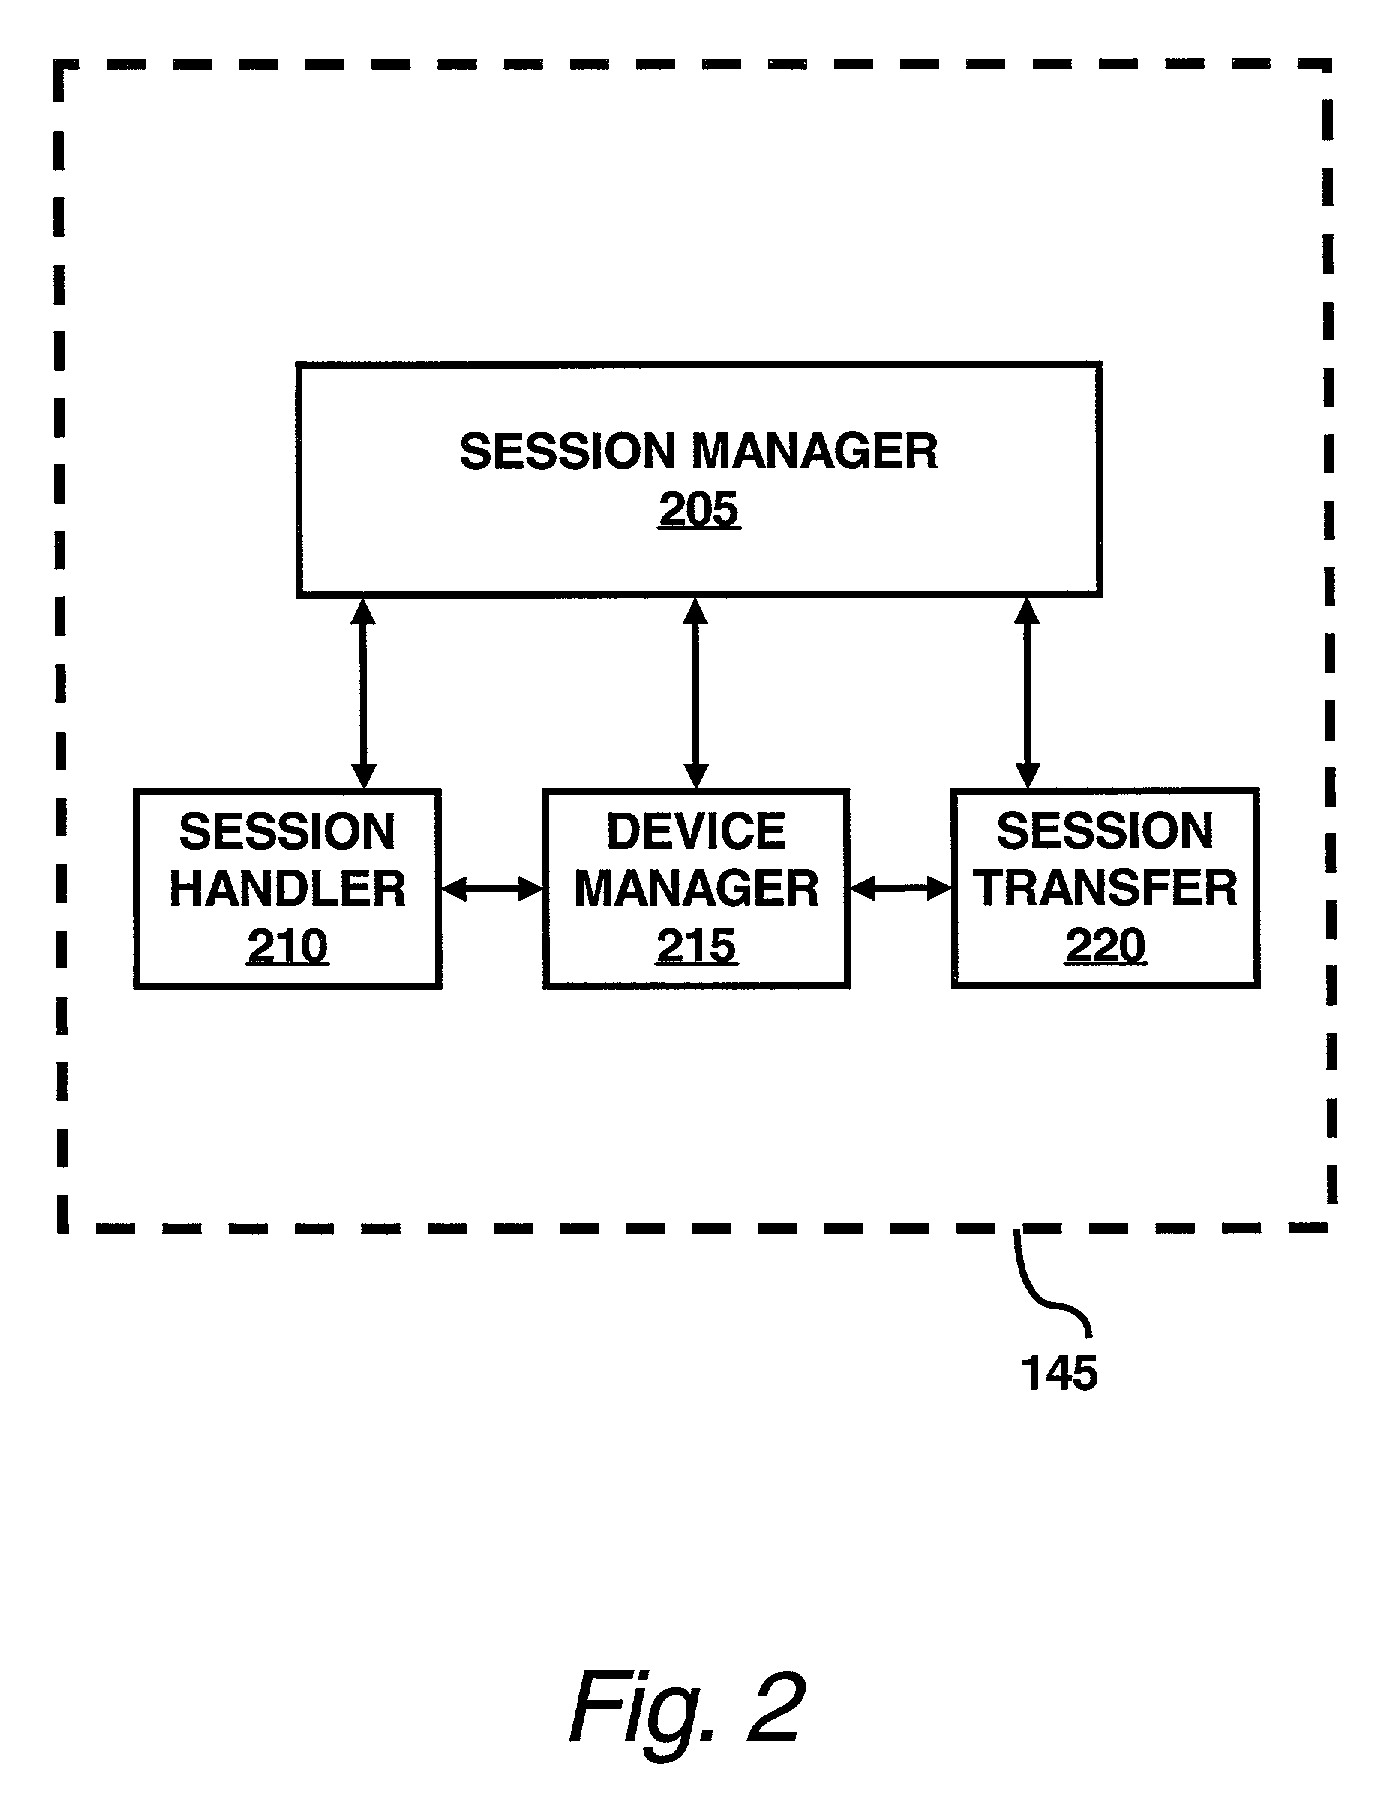 System for automated, mid-session, user-directed, device-to-device session transfer system